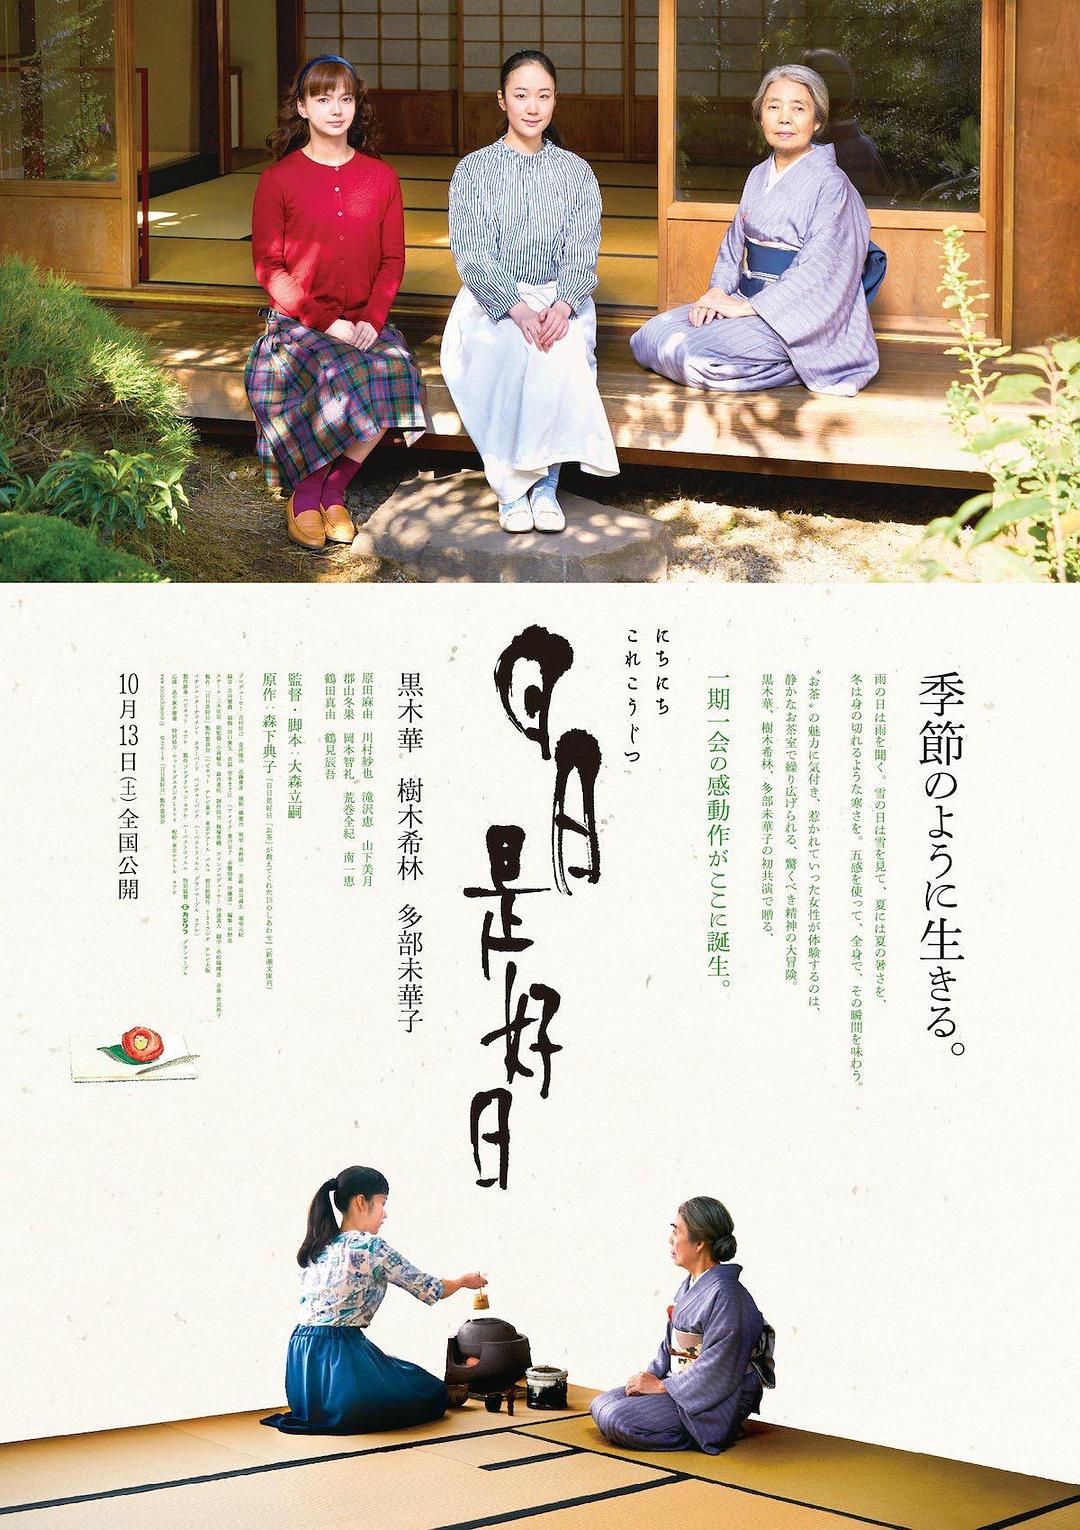 Every Day a Good Day/天天是个好日子 Every.Day.A.Good.Day.2018.JAPANESE.1080p.BluRay.x264.DTS-WiKi 8. ...